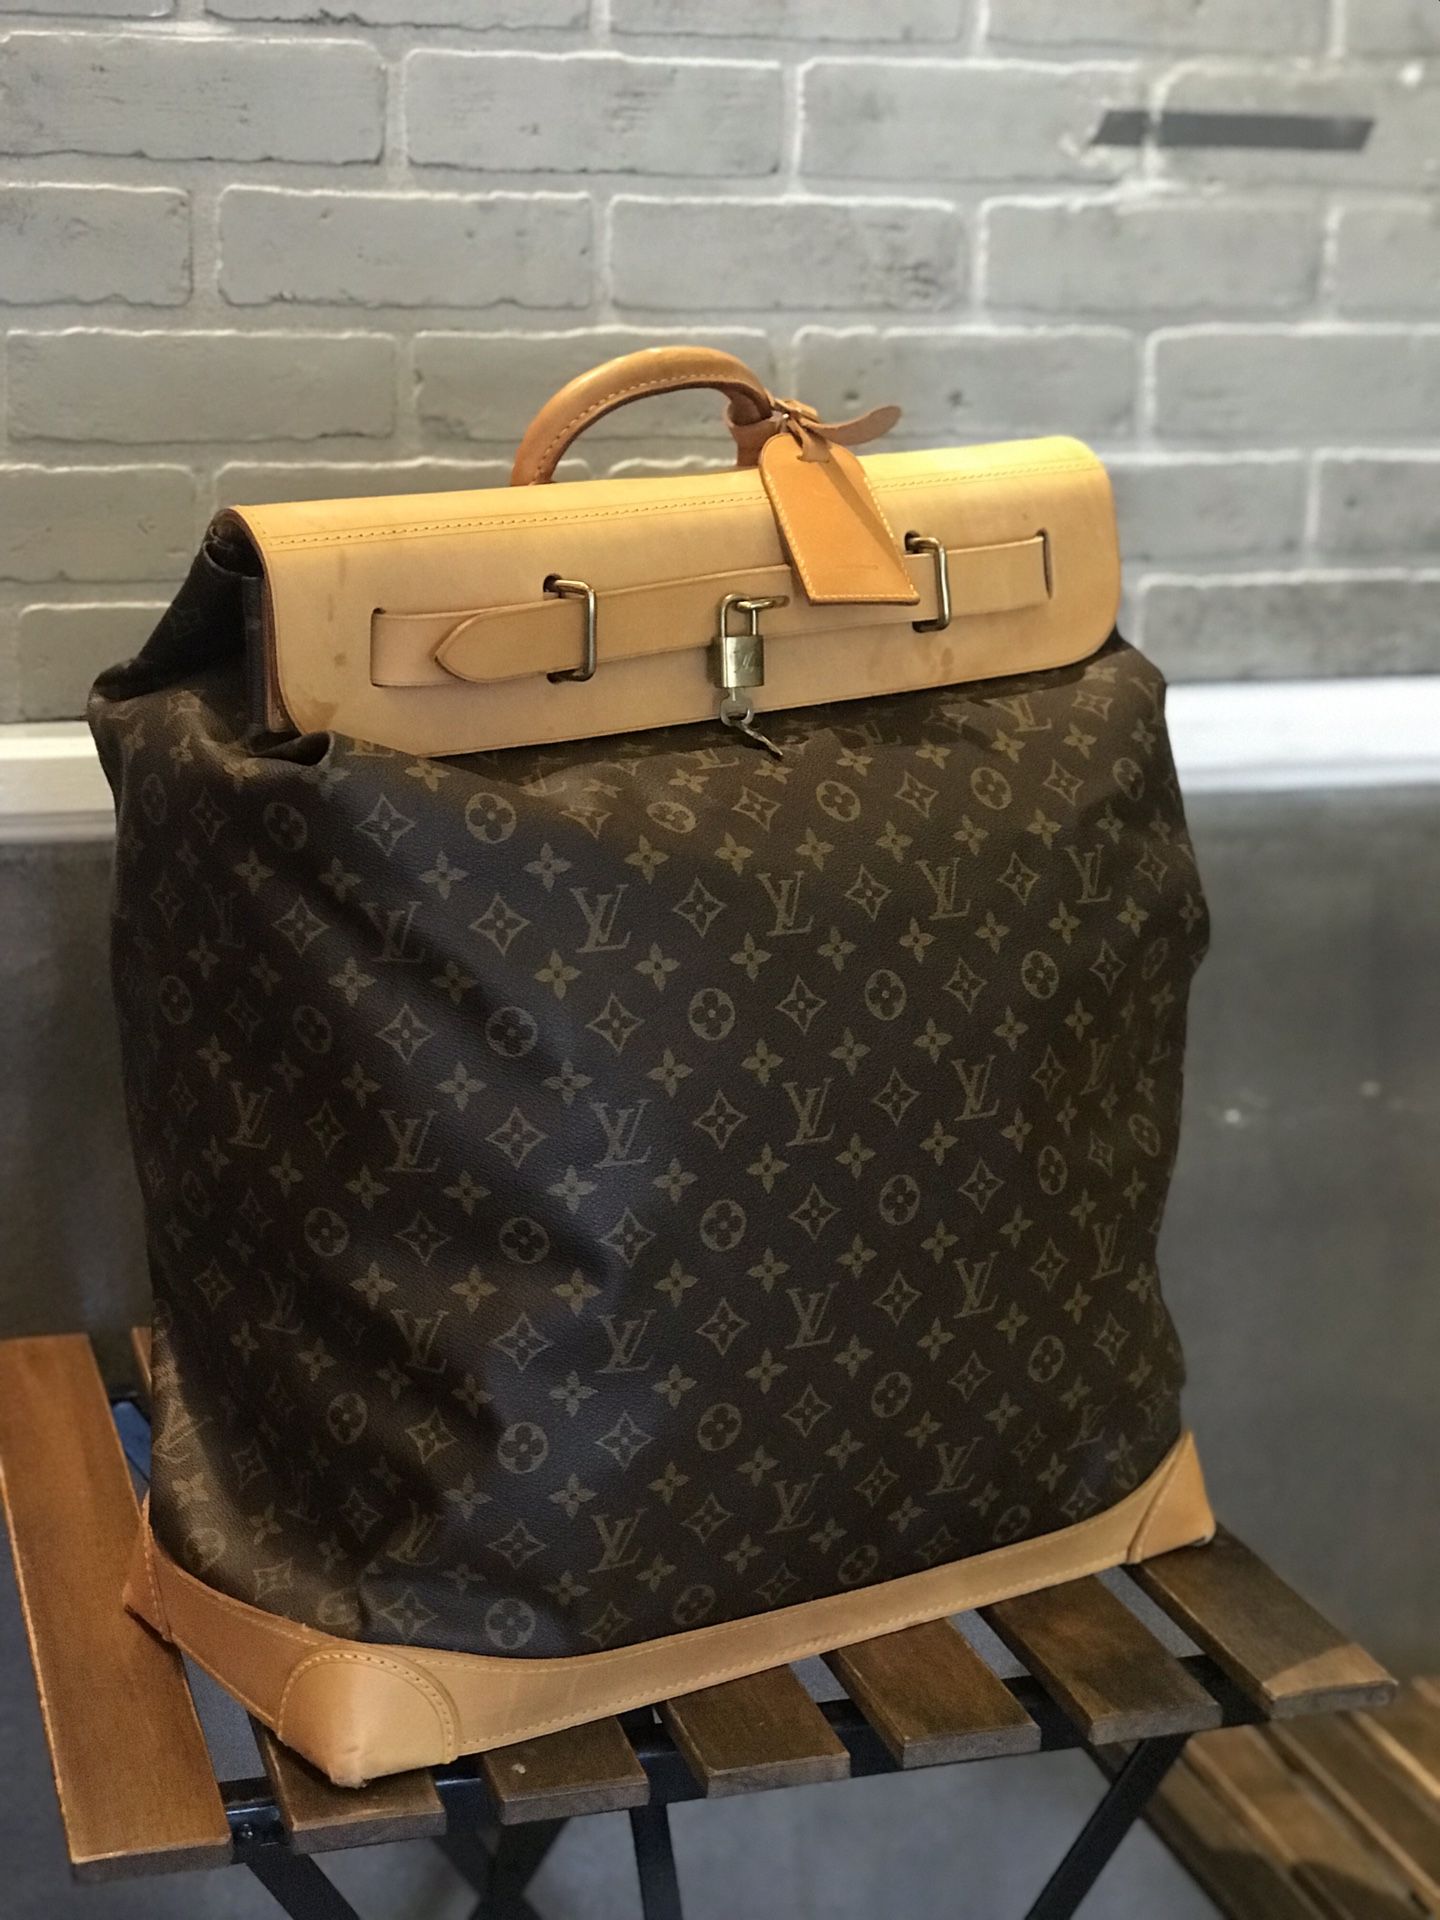 Louis Vuitton backpack and Travel Bag for Sale in Hemet, CA - OfferUp